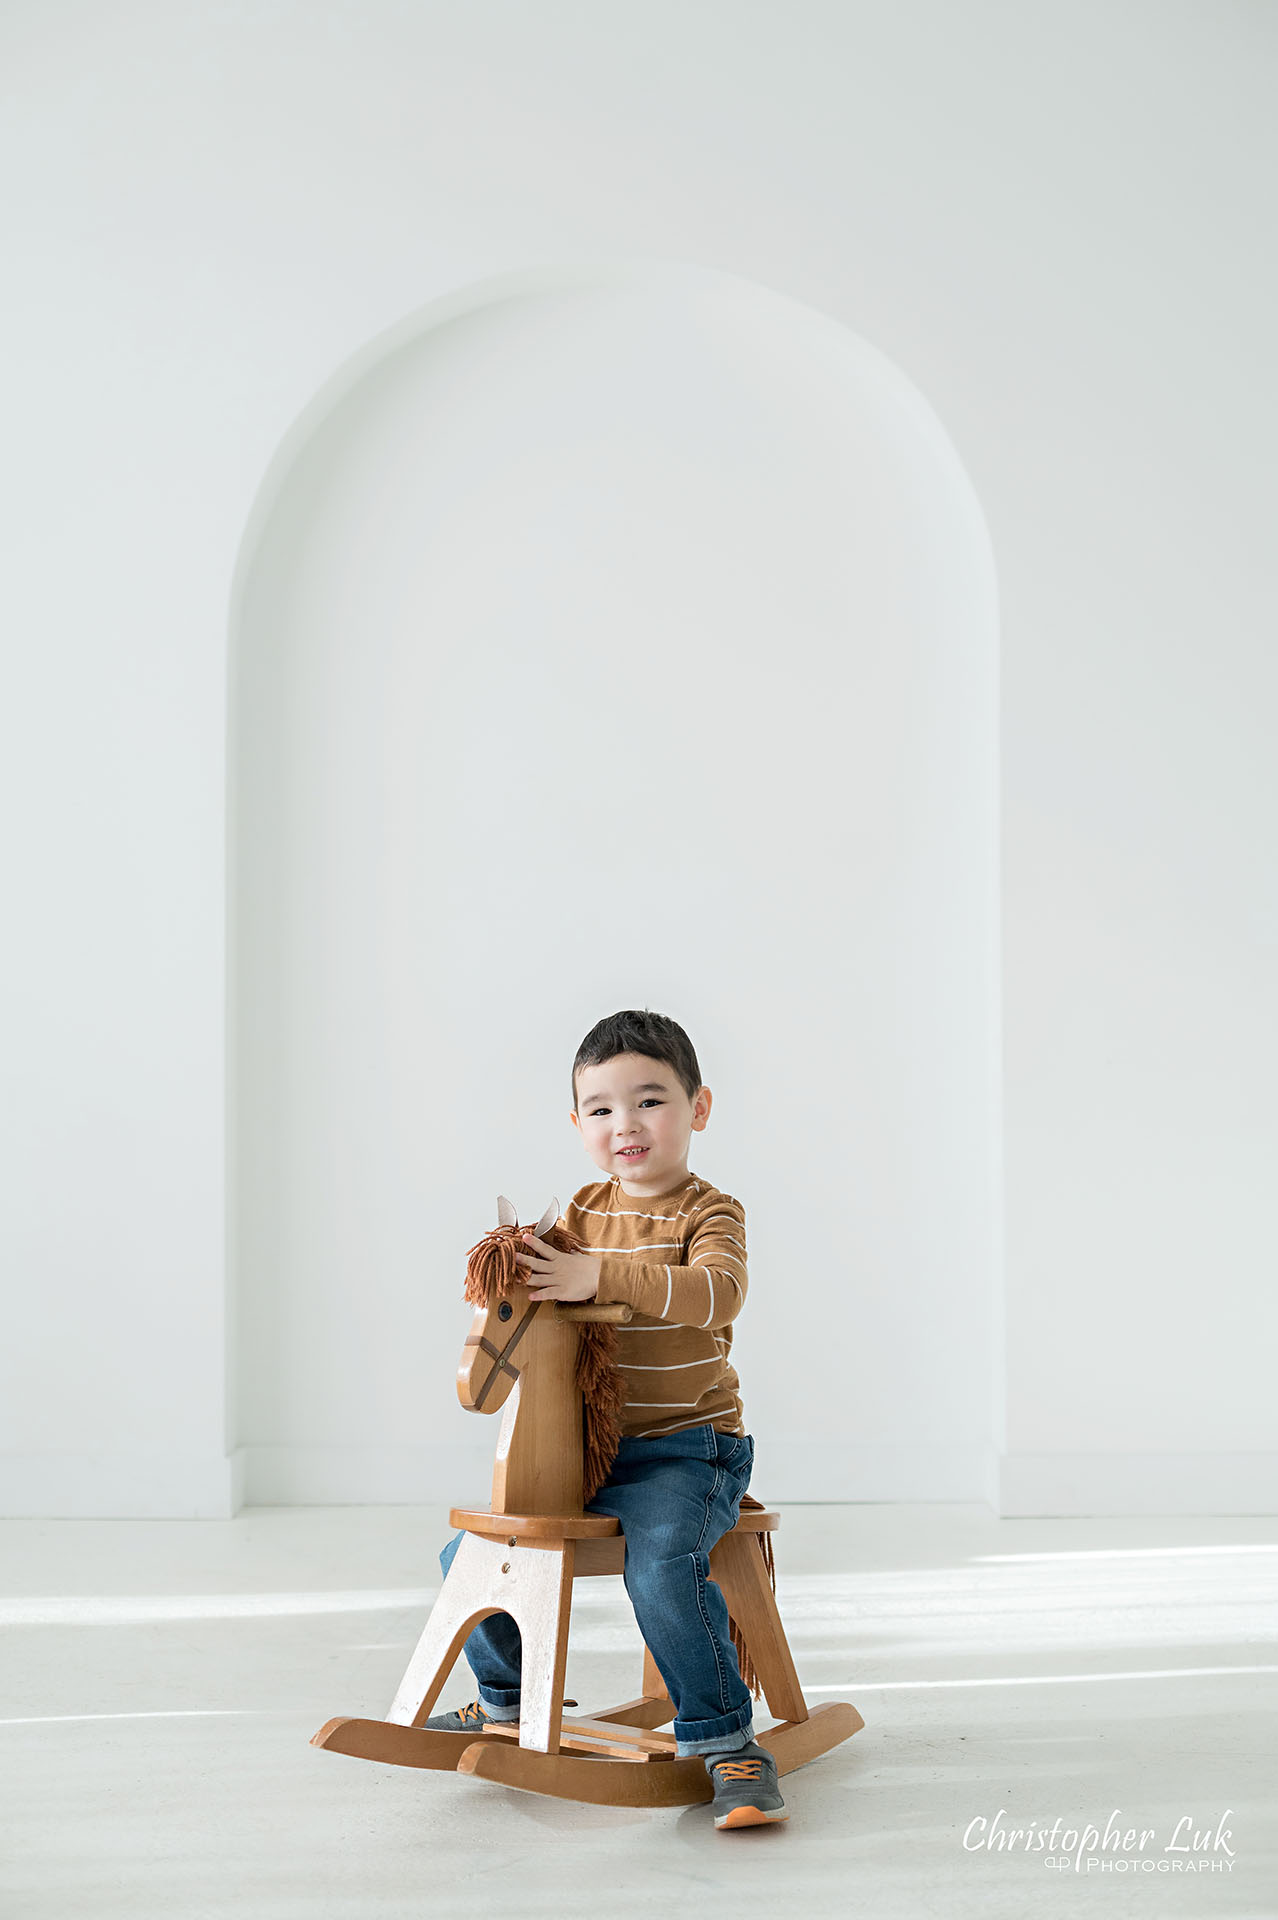 Son Brother Toddler Child Playing Wooden Rocking Horse Family Studio Portrait Candid Natural Photojournalistic